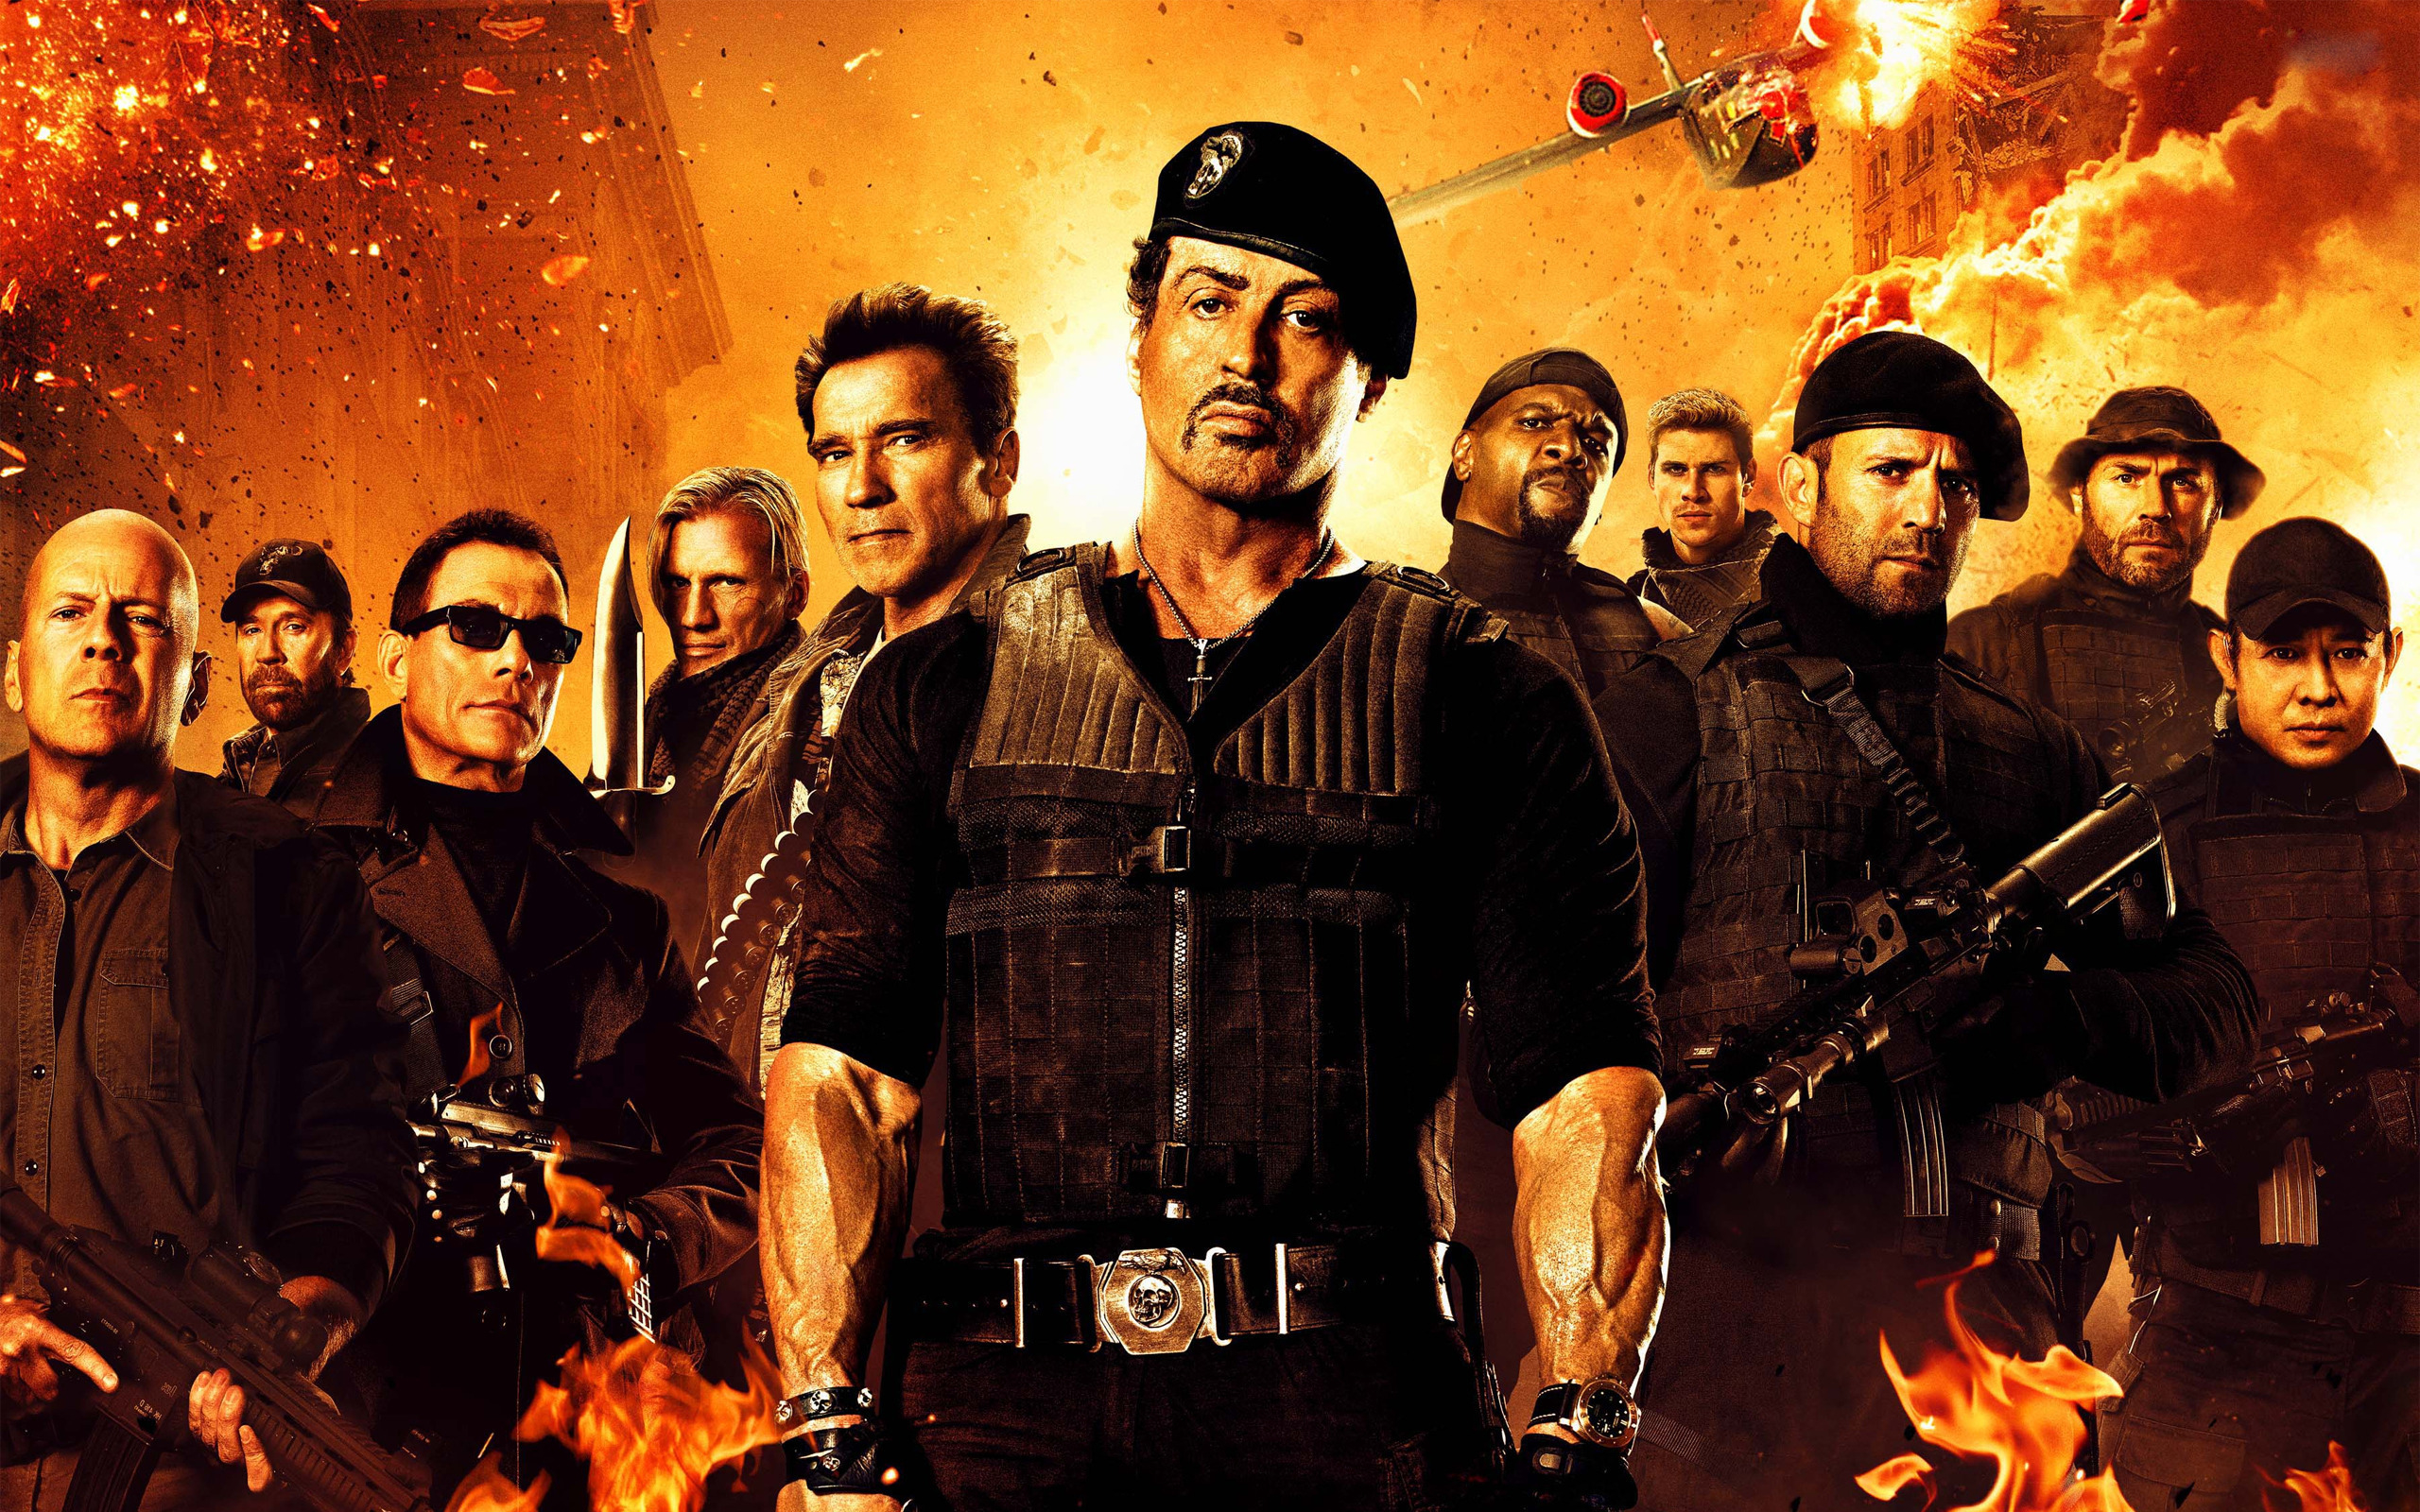 movie, the expendables 2, arnold schwarzenegger, barney ross, billy (the expendables), booker (the expendables), bruce willis, chuck norris, church (the expendables), dolph lundgren, gunnar jensen, hale caesar, jason statham, jean claude van damme, jet li, lee christmas, liam hemsworth, randy couture, sylvester stallone, terry crews, toll road, trench (the expendables), vilain (the expendables), yin yang (the expendables), the expendables